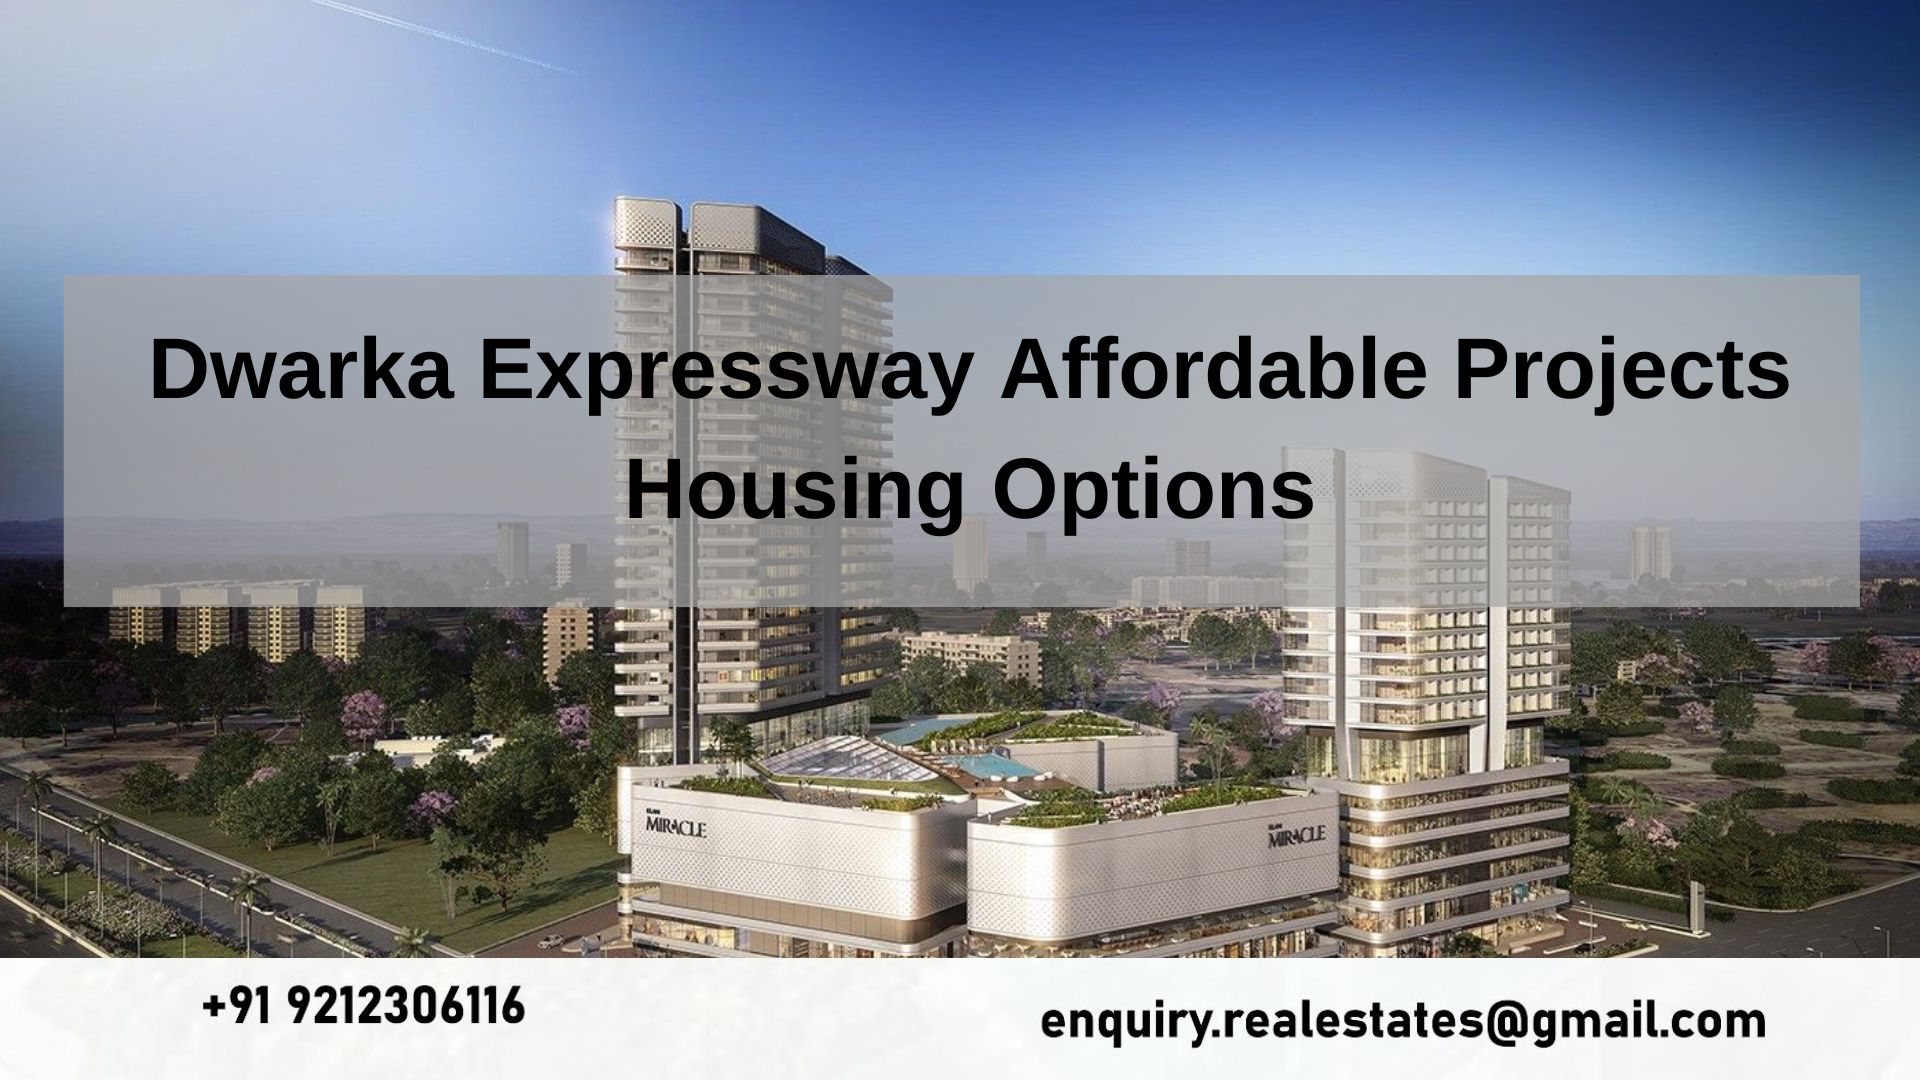 Dwarka Expressway Affordable Projects Housing Options